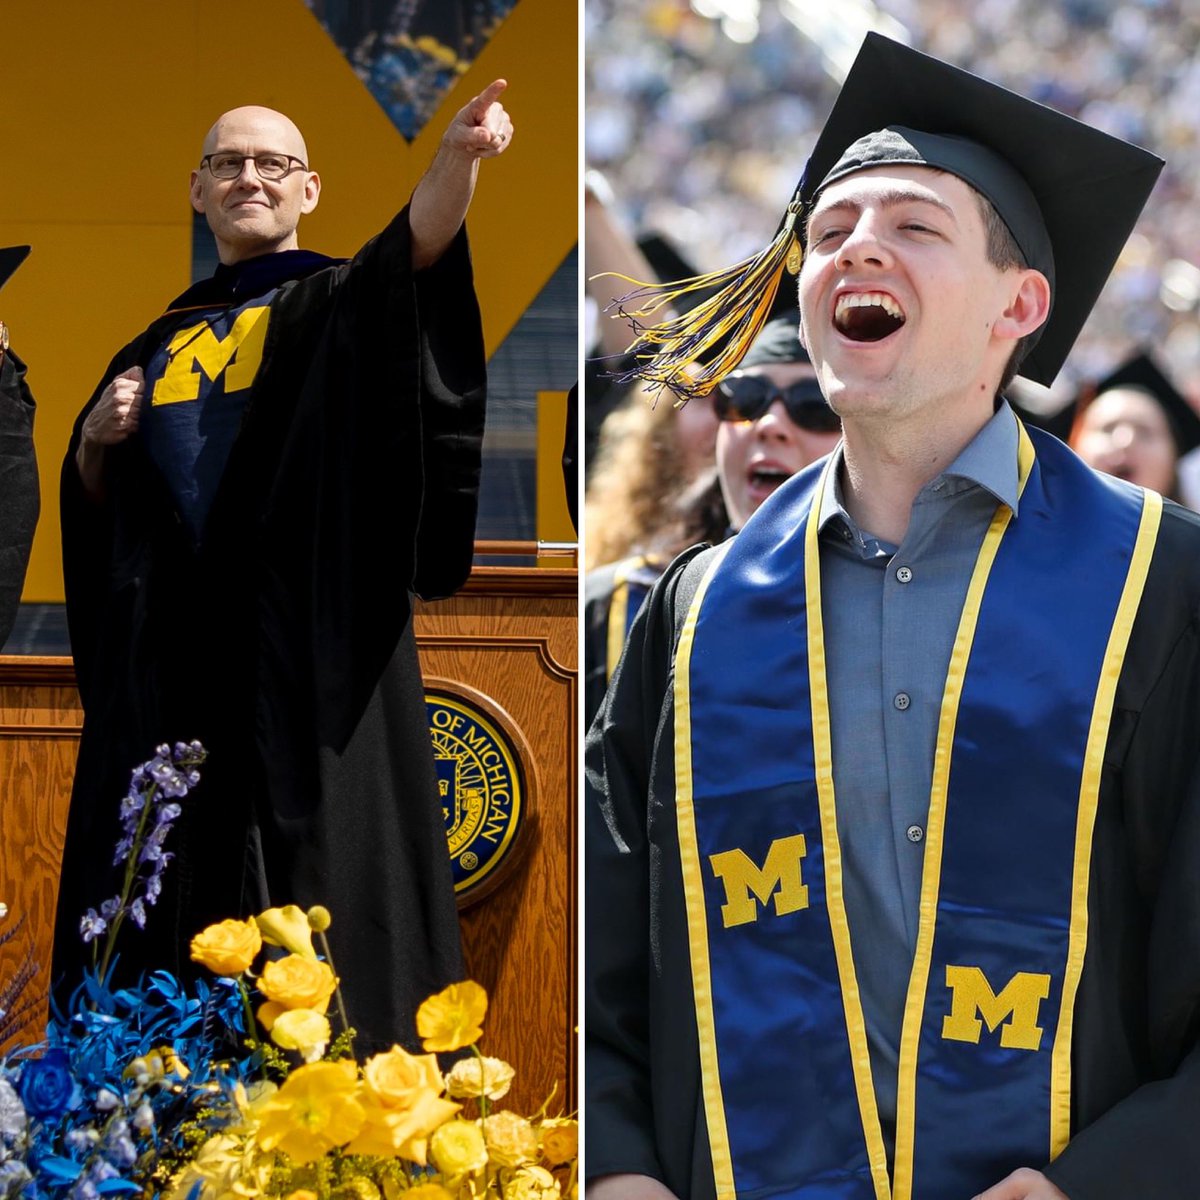 My son hadn’t had a proper graduation since middle school. Here’s my commencement address at Michigan, written for him & Class of 2024. Please share it — we all need more empathy. “If you really want to shock the world, unleash your kindness.” youtube.com/watch?v=D1c_UC…